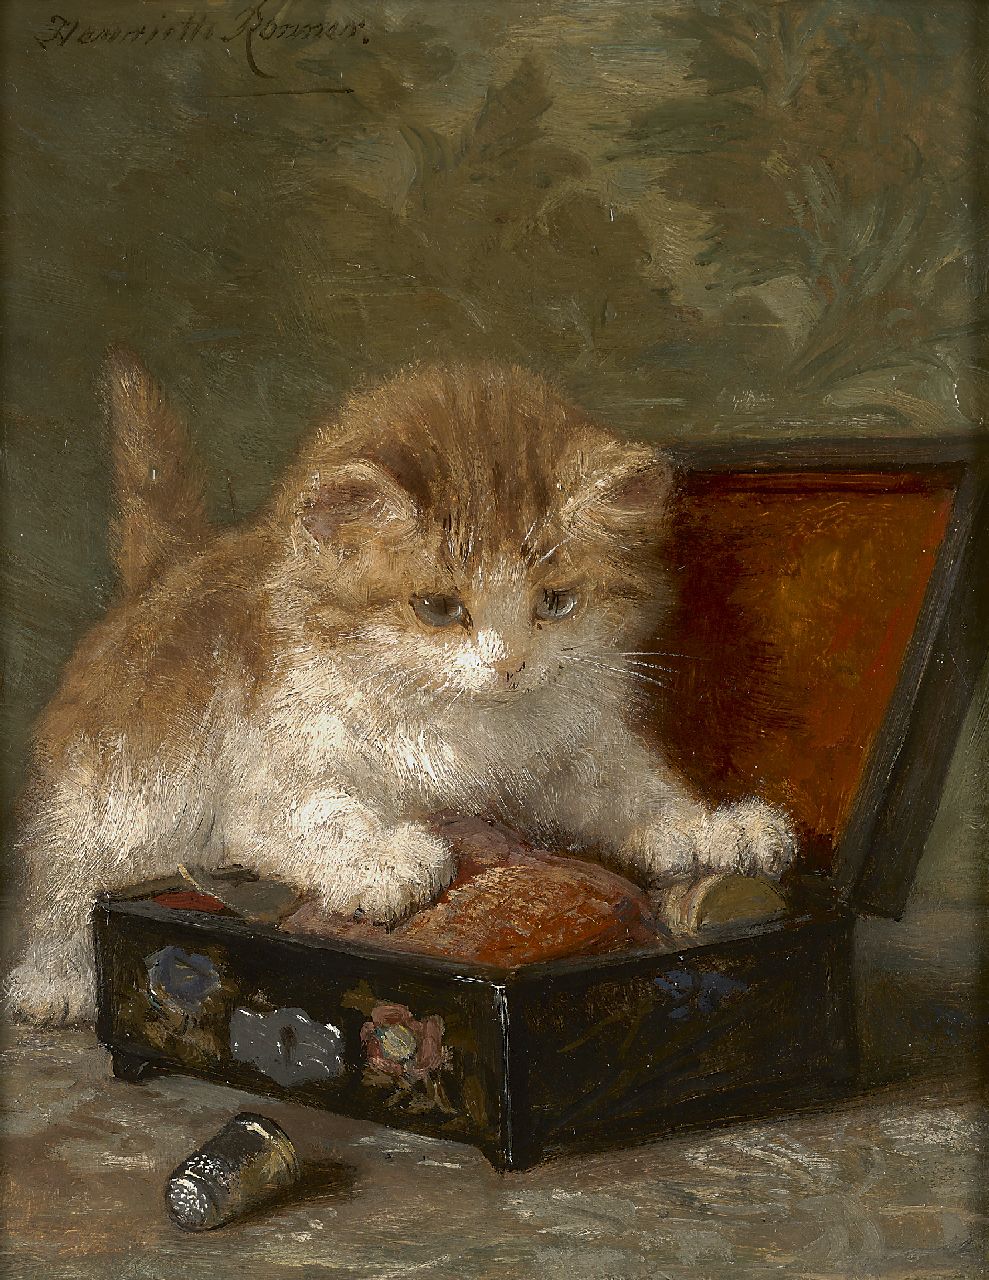 Ronner-Knip H.  | Henriette Ronner-Knip, The sewing box, oil on panel 24.0 x 18.9 cm, signed u.l.